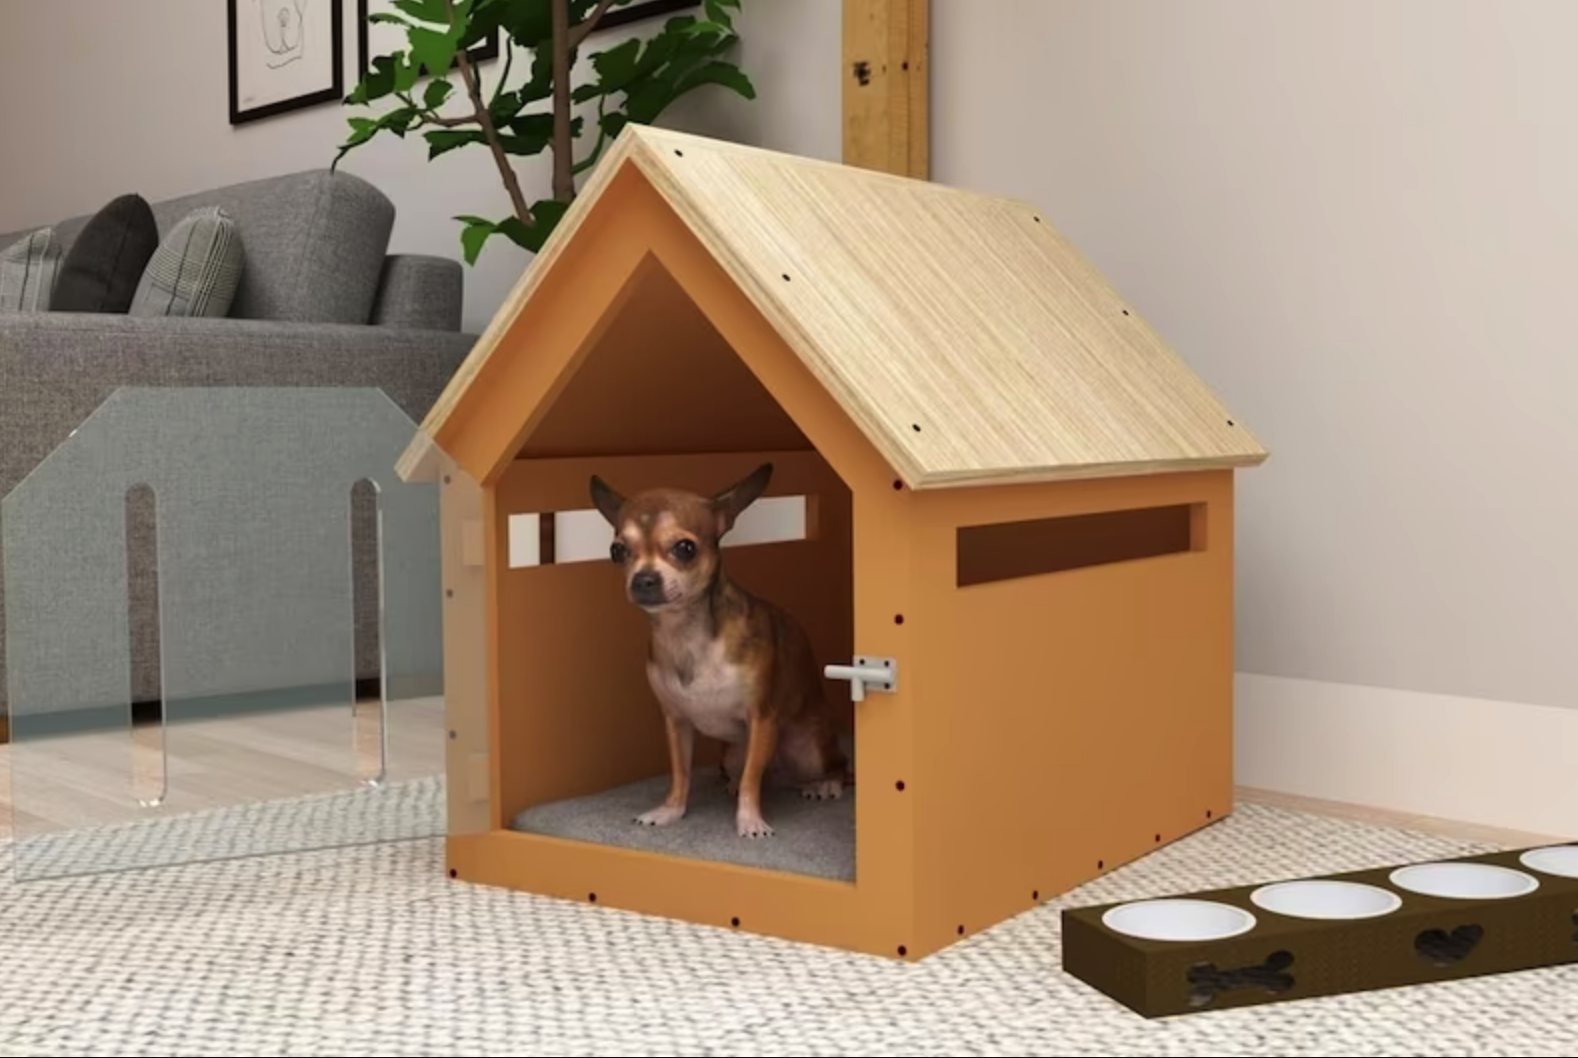 wood panel diy dog house with door and latch in living room with small dog inside